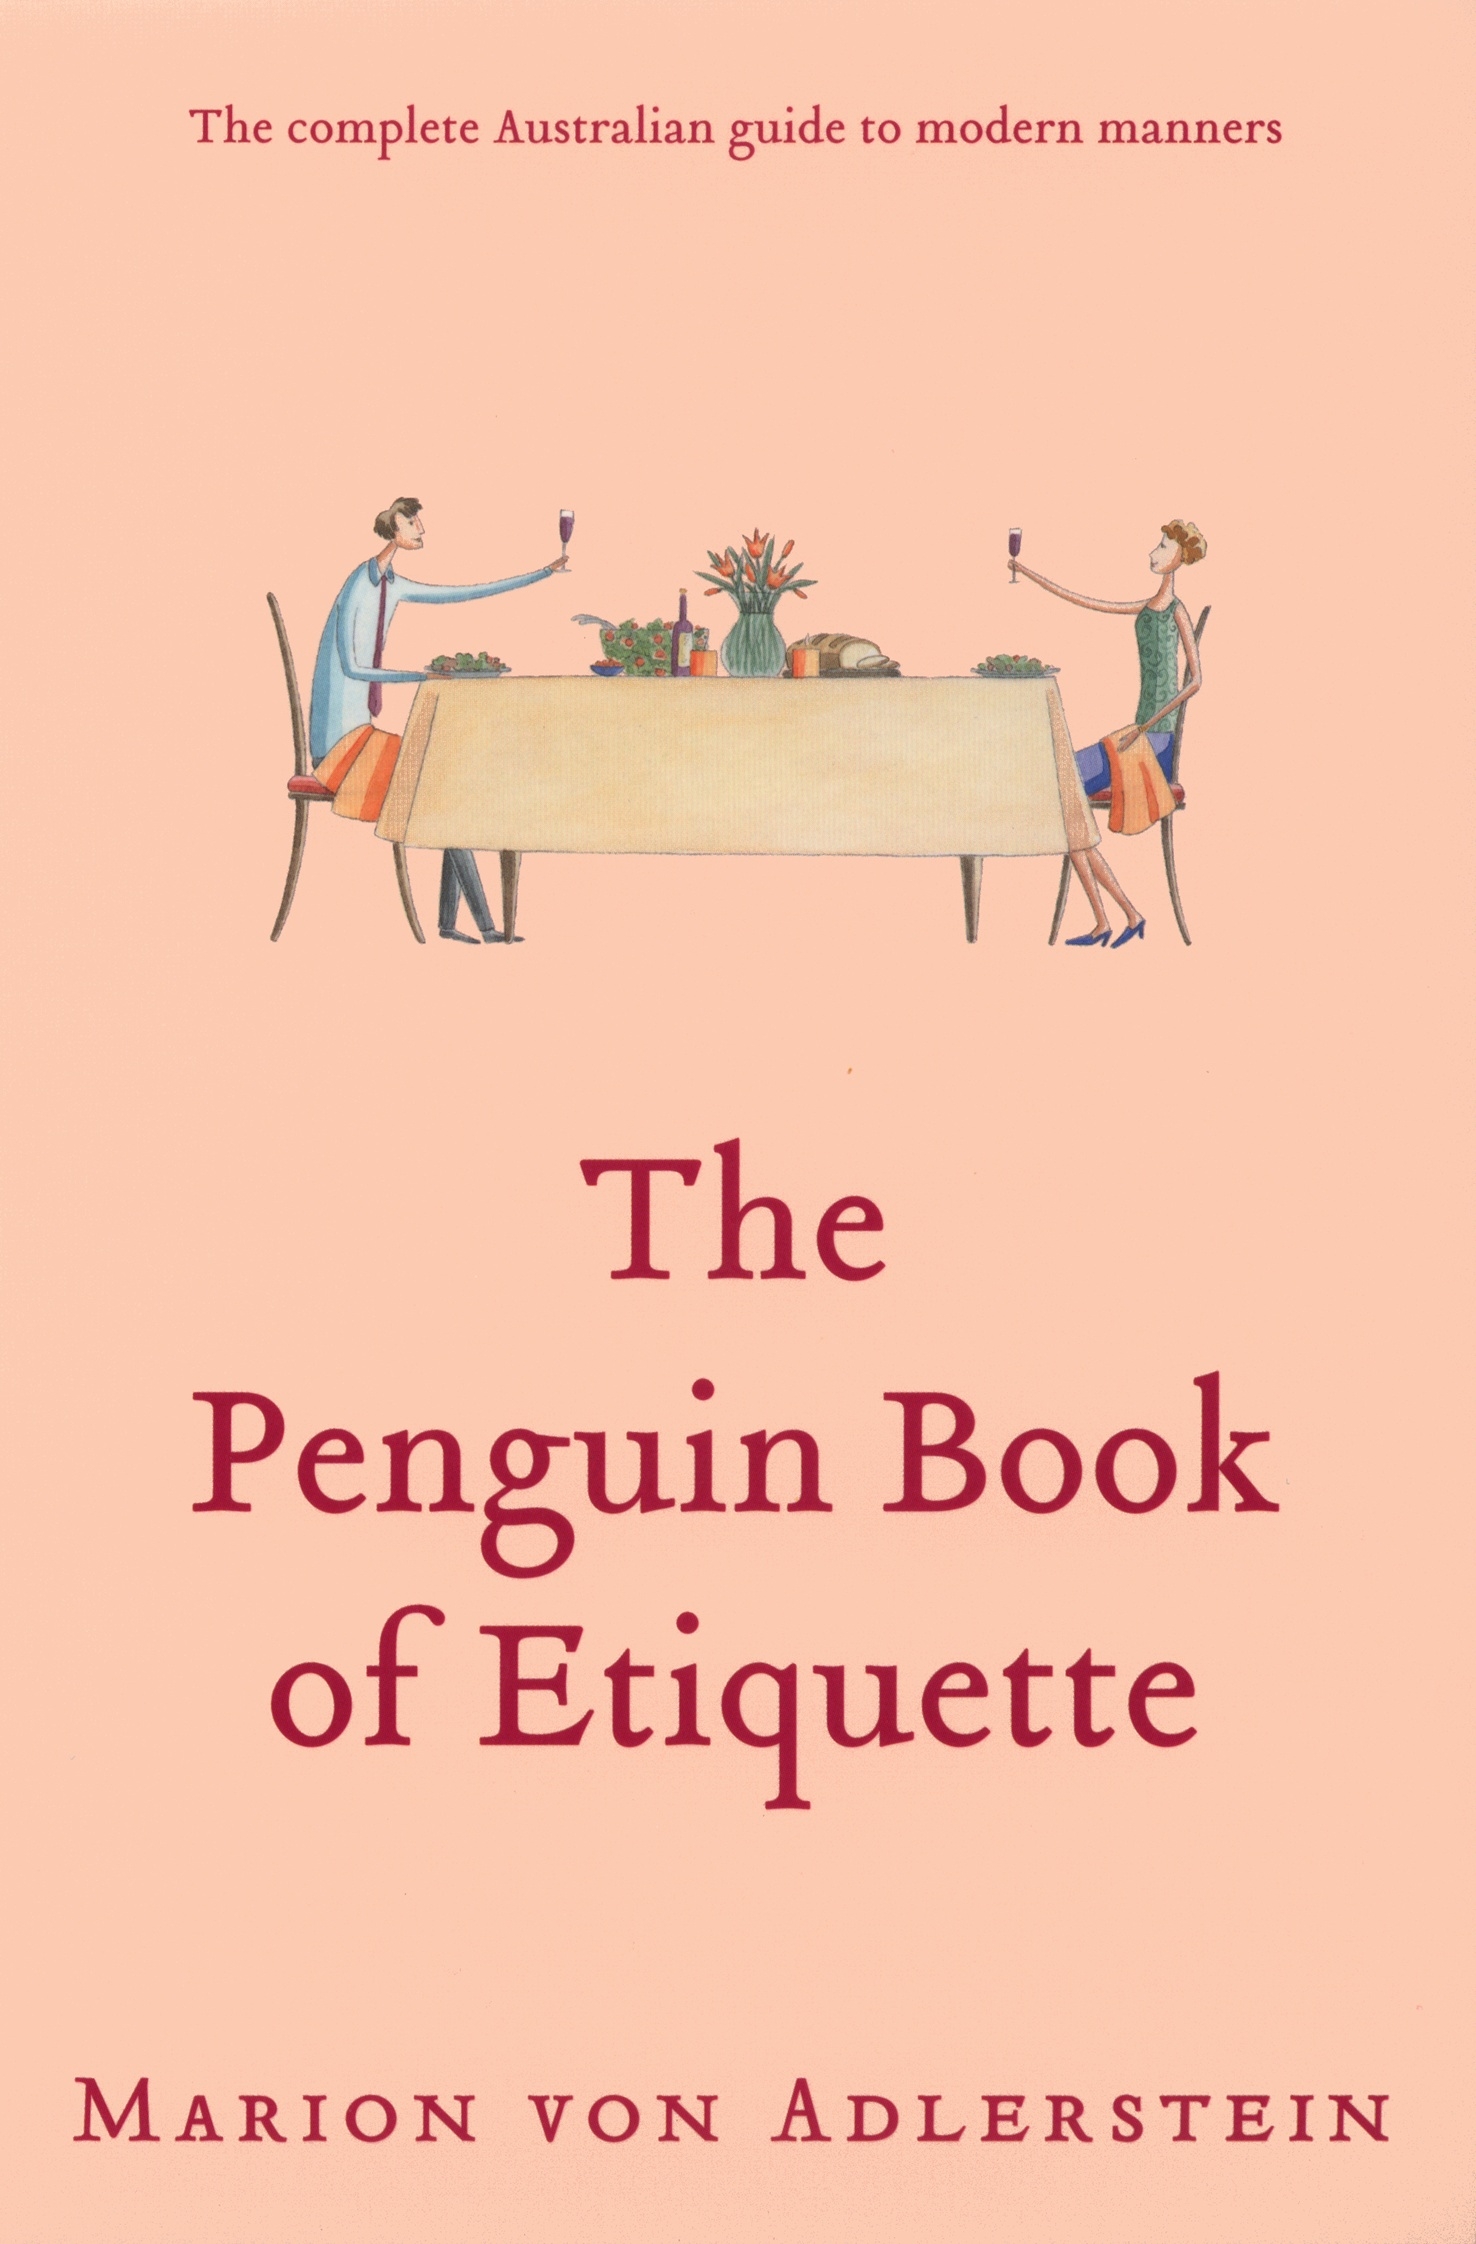 The Penguin Book of Etiquette: The complete Australian guide to modern manners